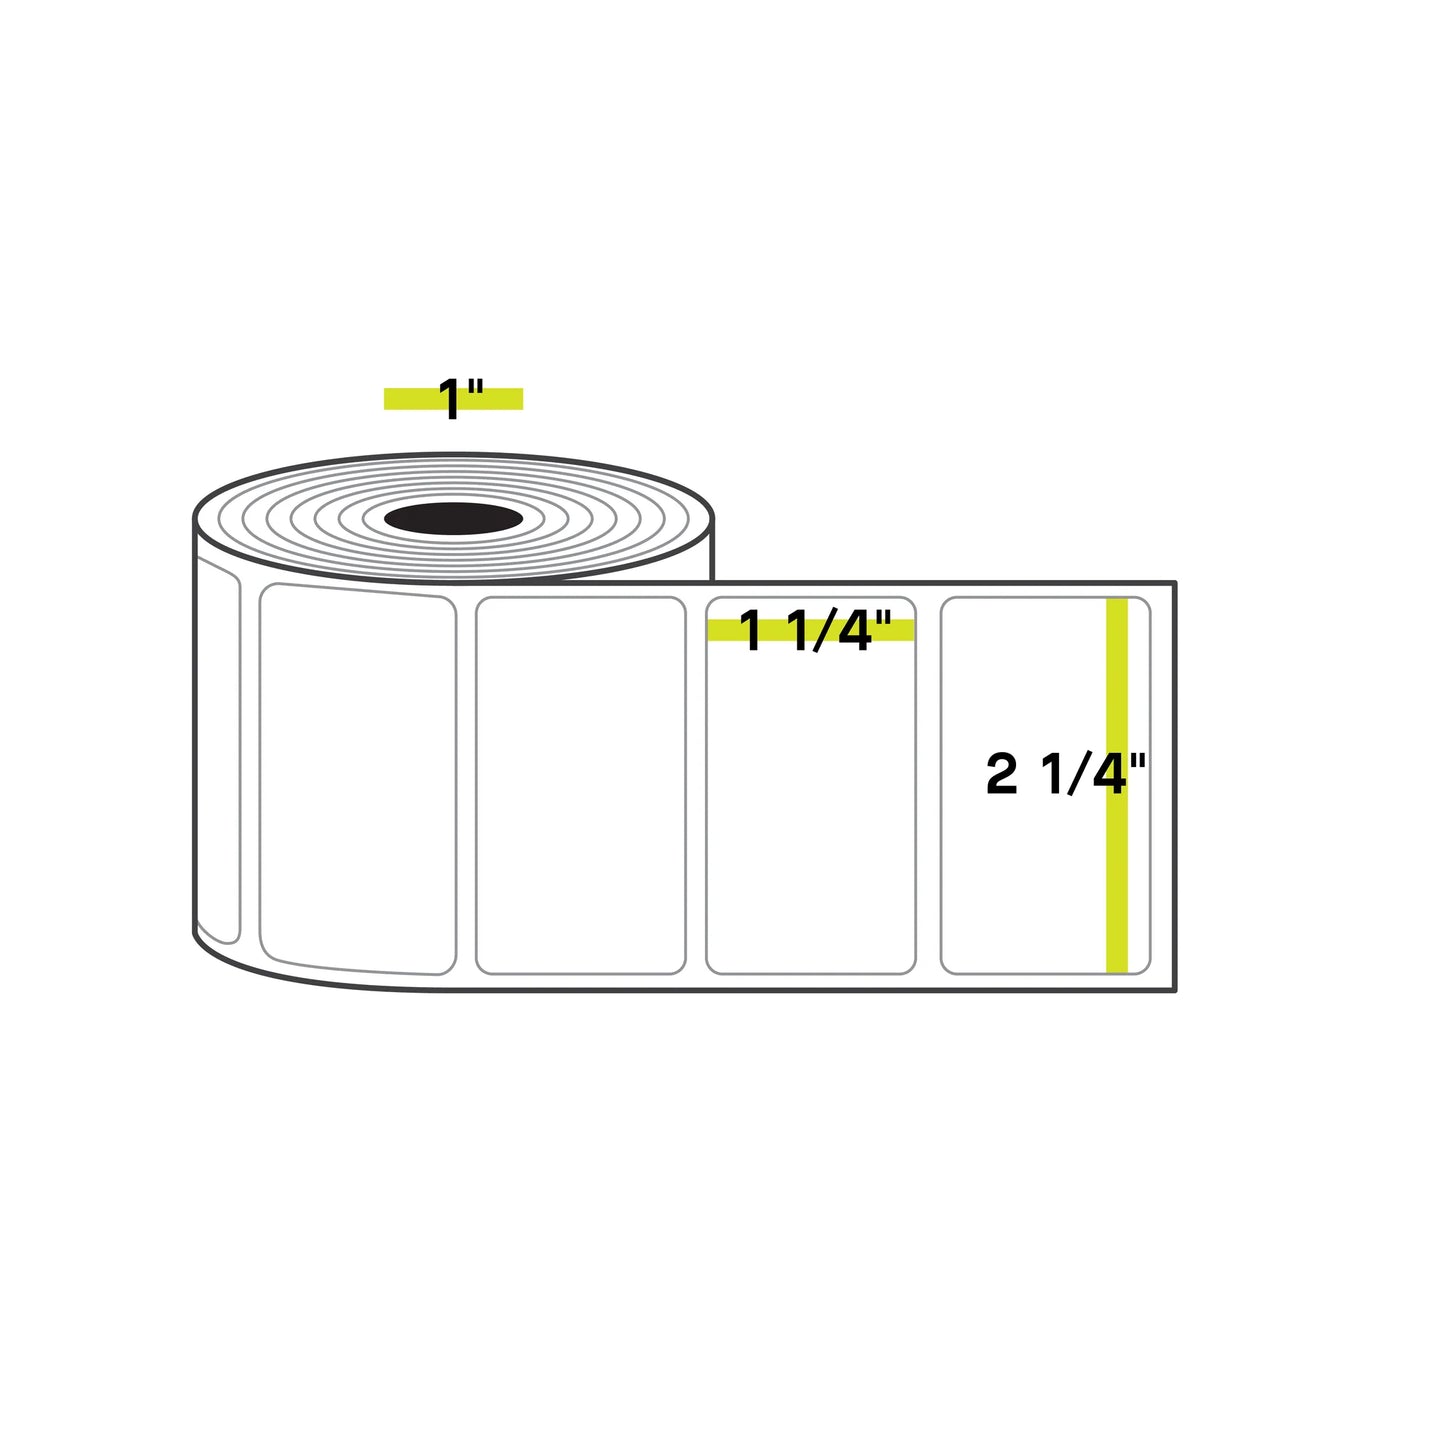 2 1/4" x 1 1/4", 1 inch Core, Direct Thermal Labels, 1000/Roll, 12 Rolls/Case